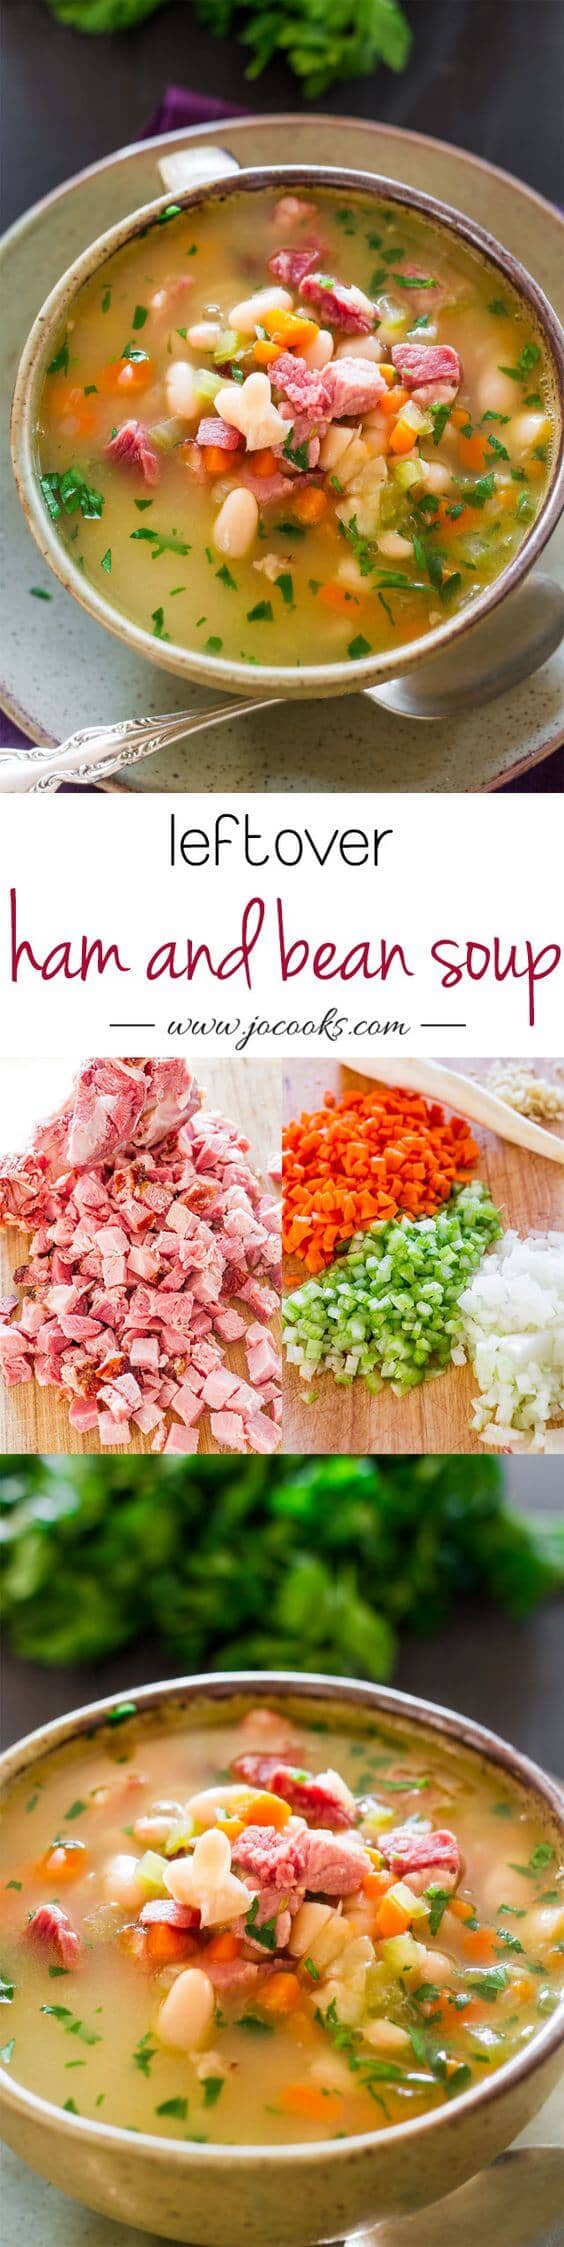 Use Leftovers Wisely with Ham and Bean Soup